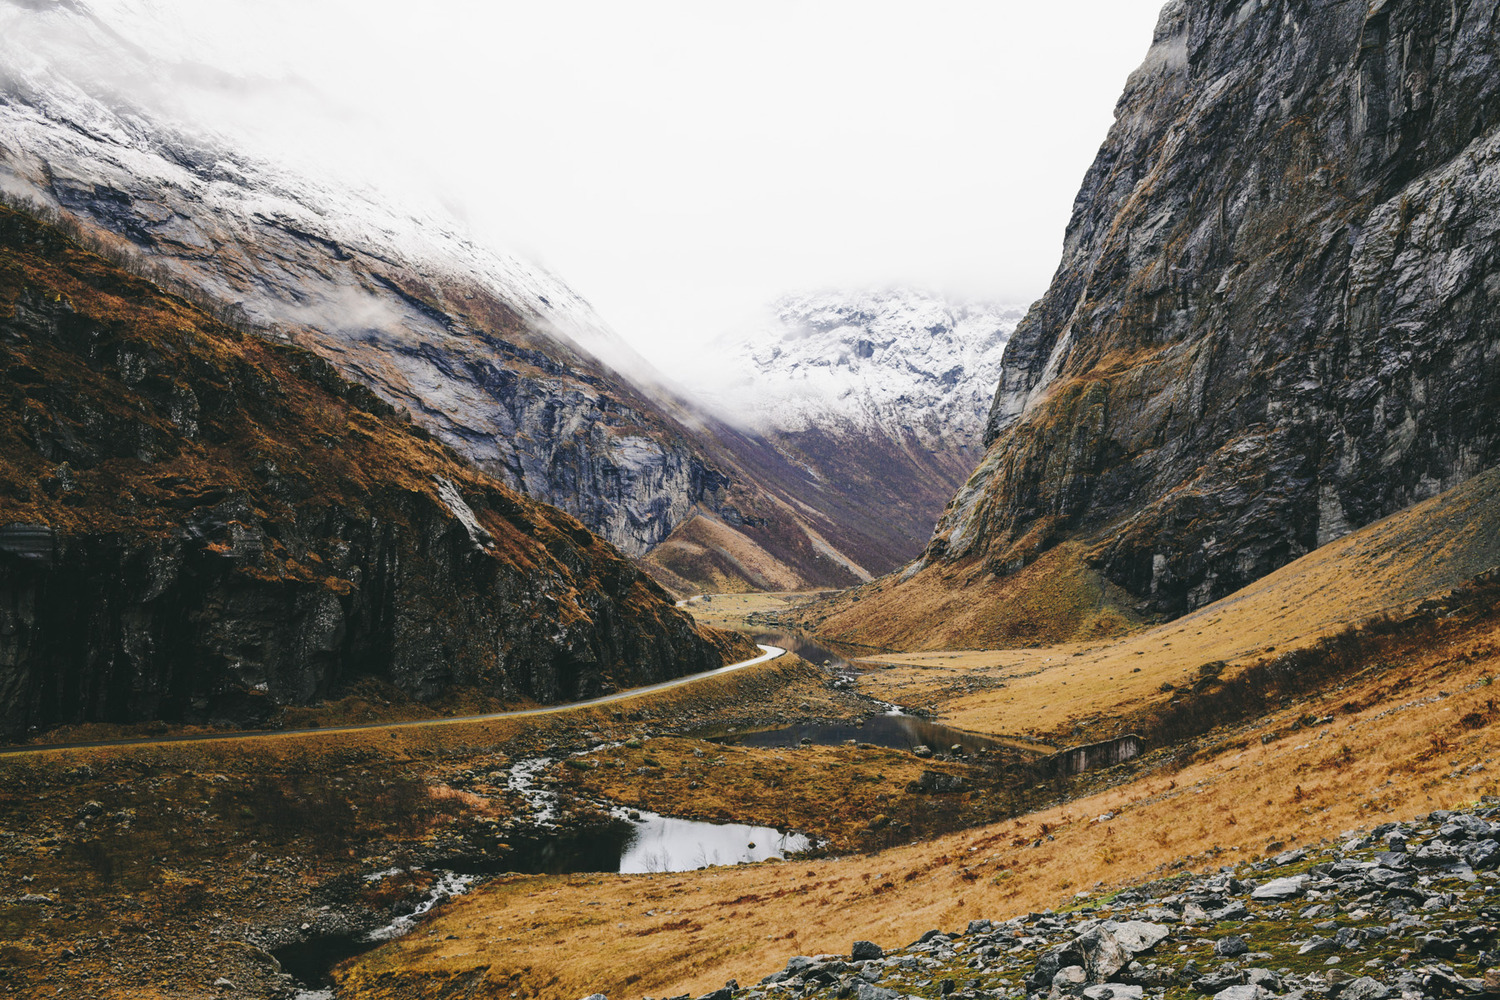 The_Fjords_Norway-Alex_Strohl-19.jpg